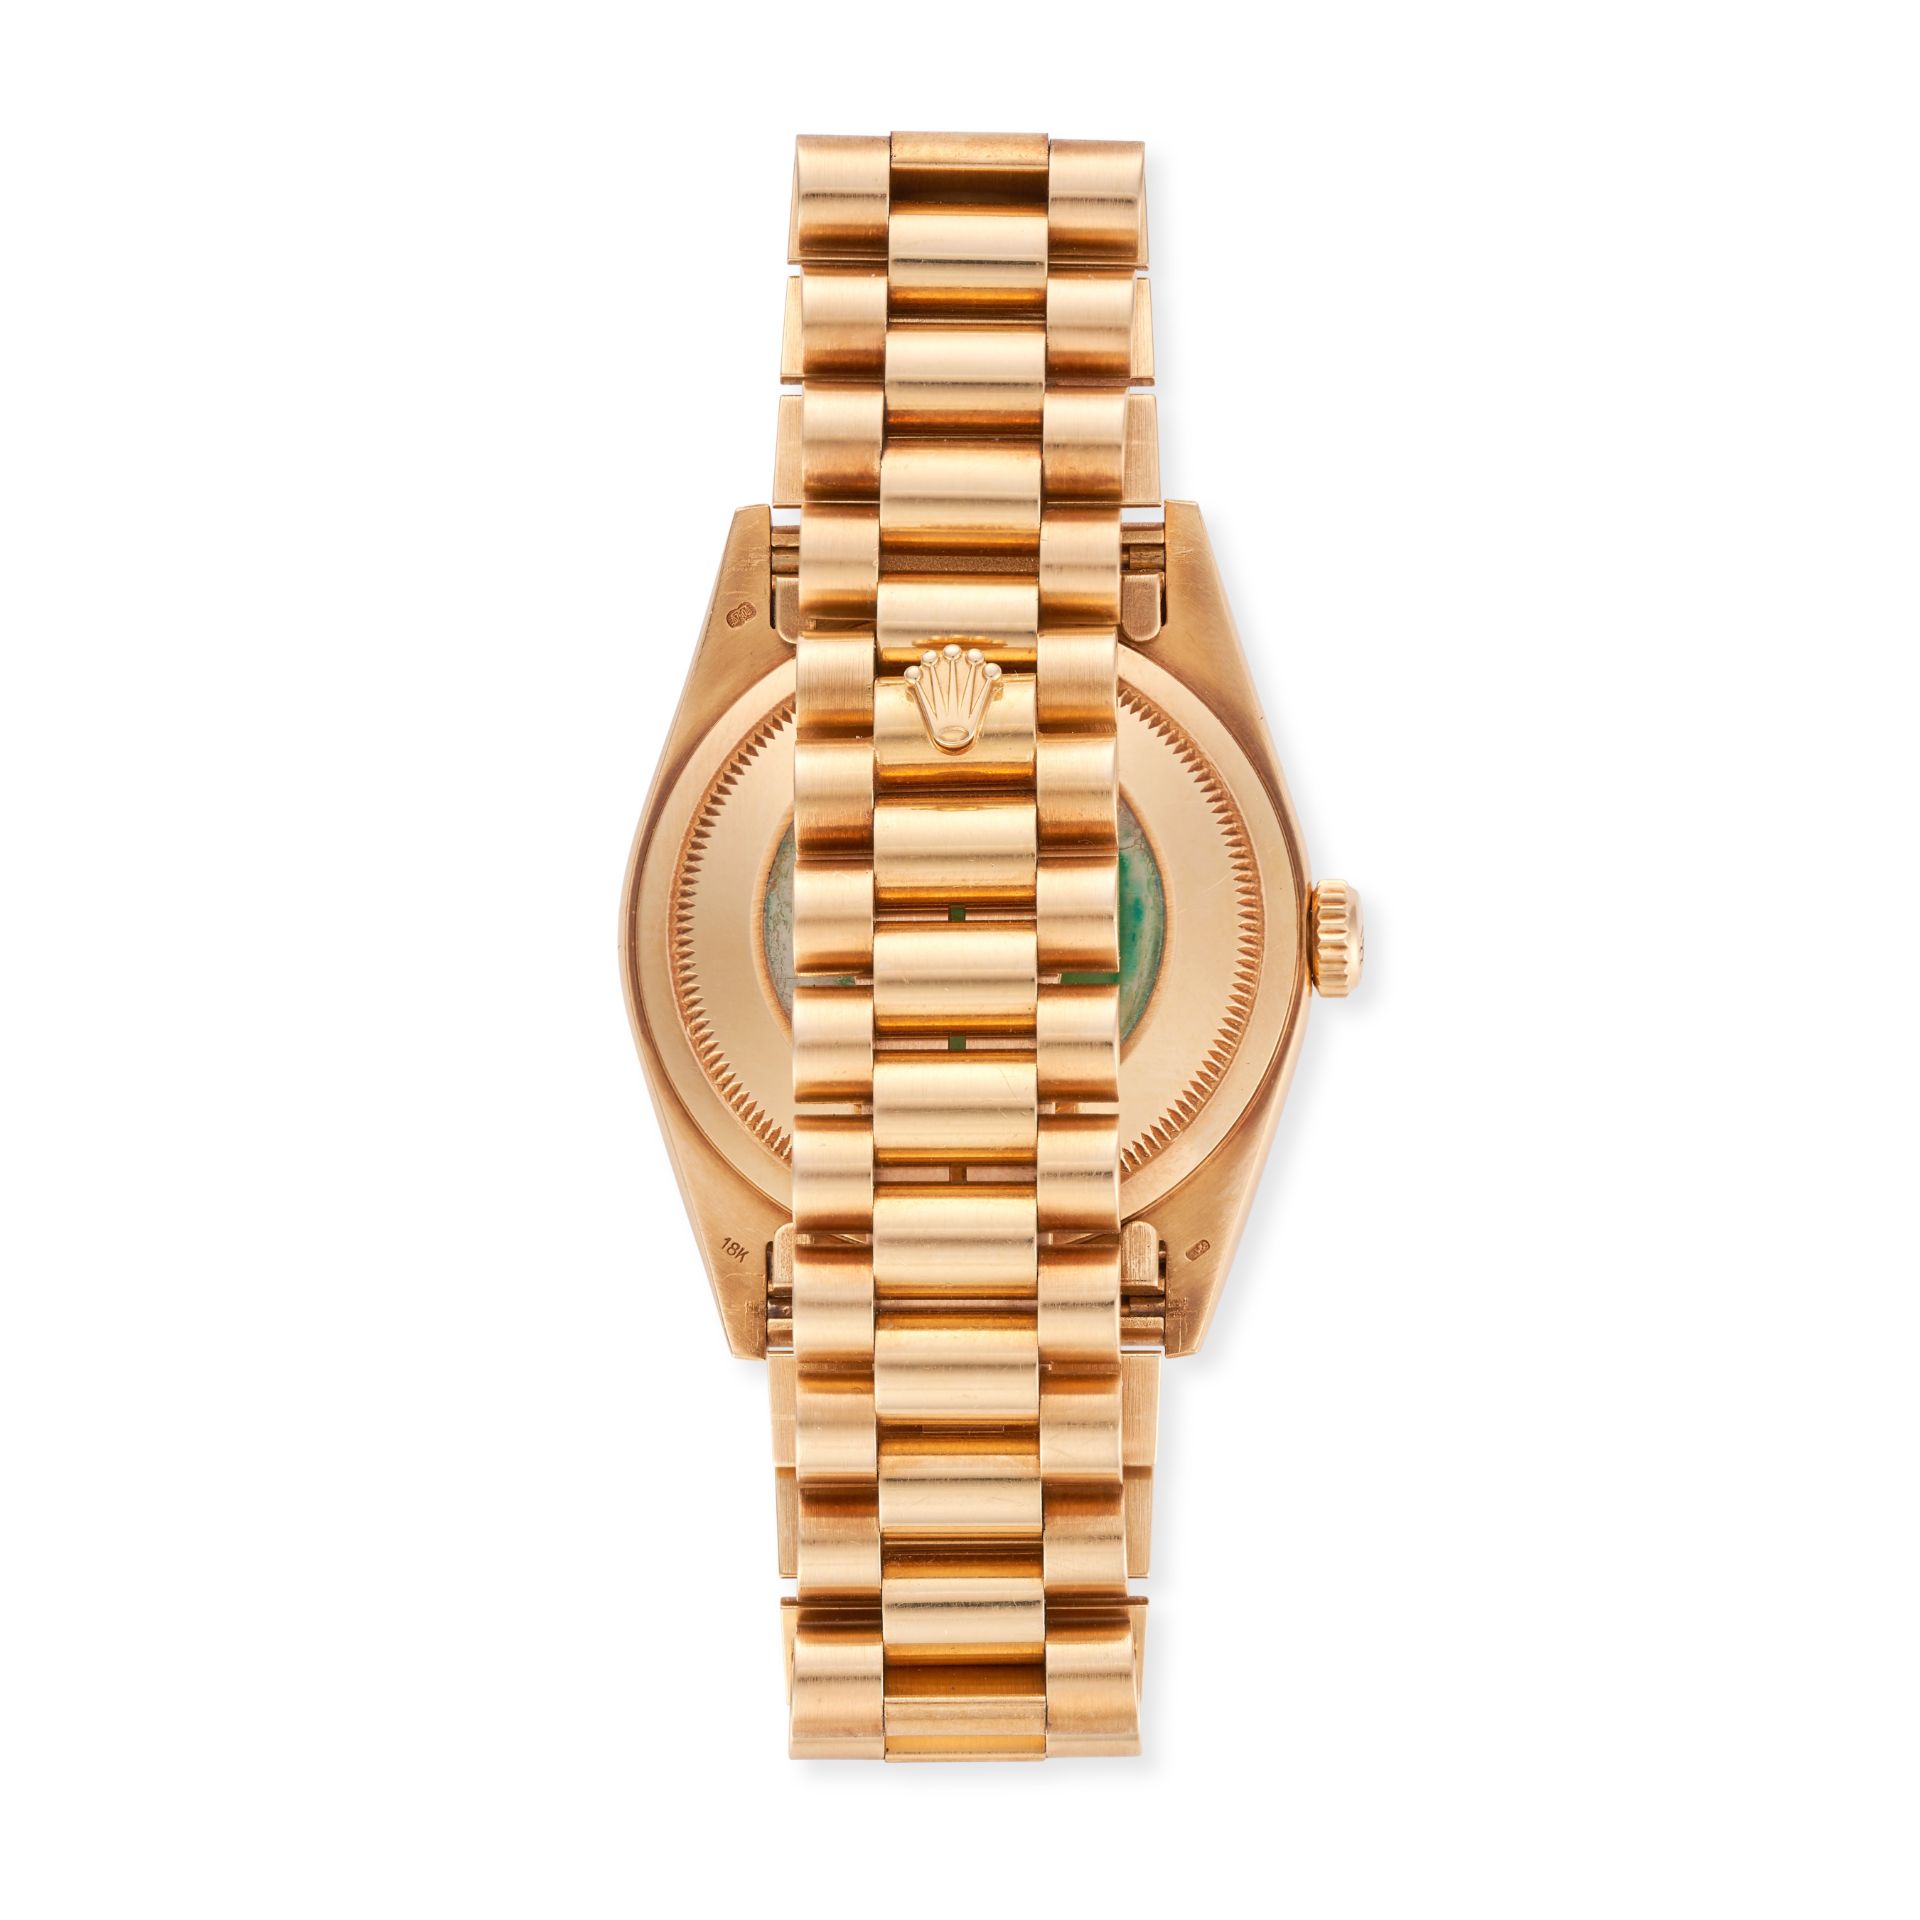 ROLEX, A DAY-DATE 36 WRISTWATCH in 18ct yellow gold, ref. 18238, E9XXXXX, circa 1990, gold fluted... - Image 2 of 3